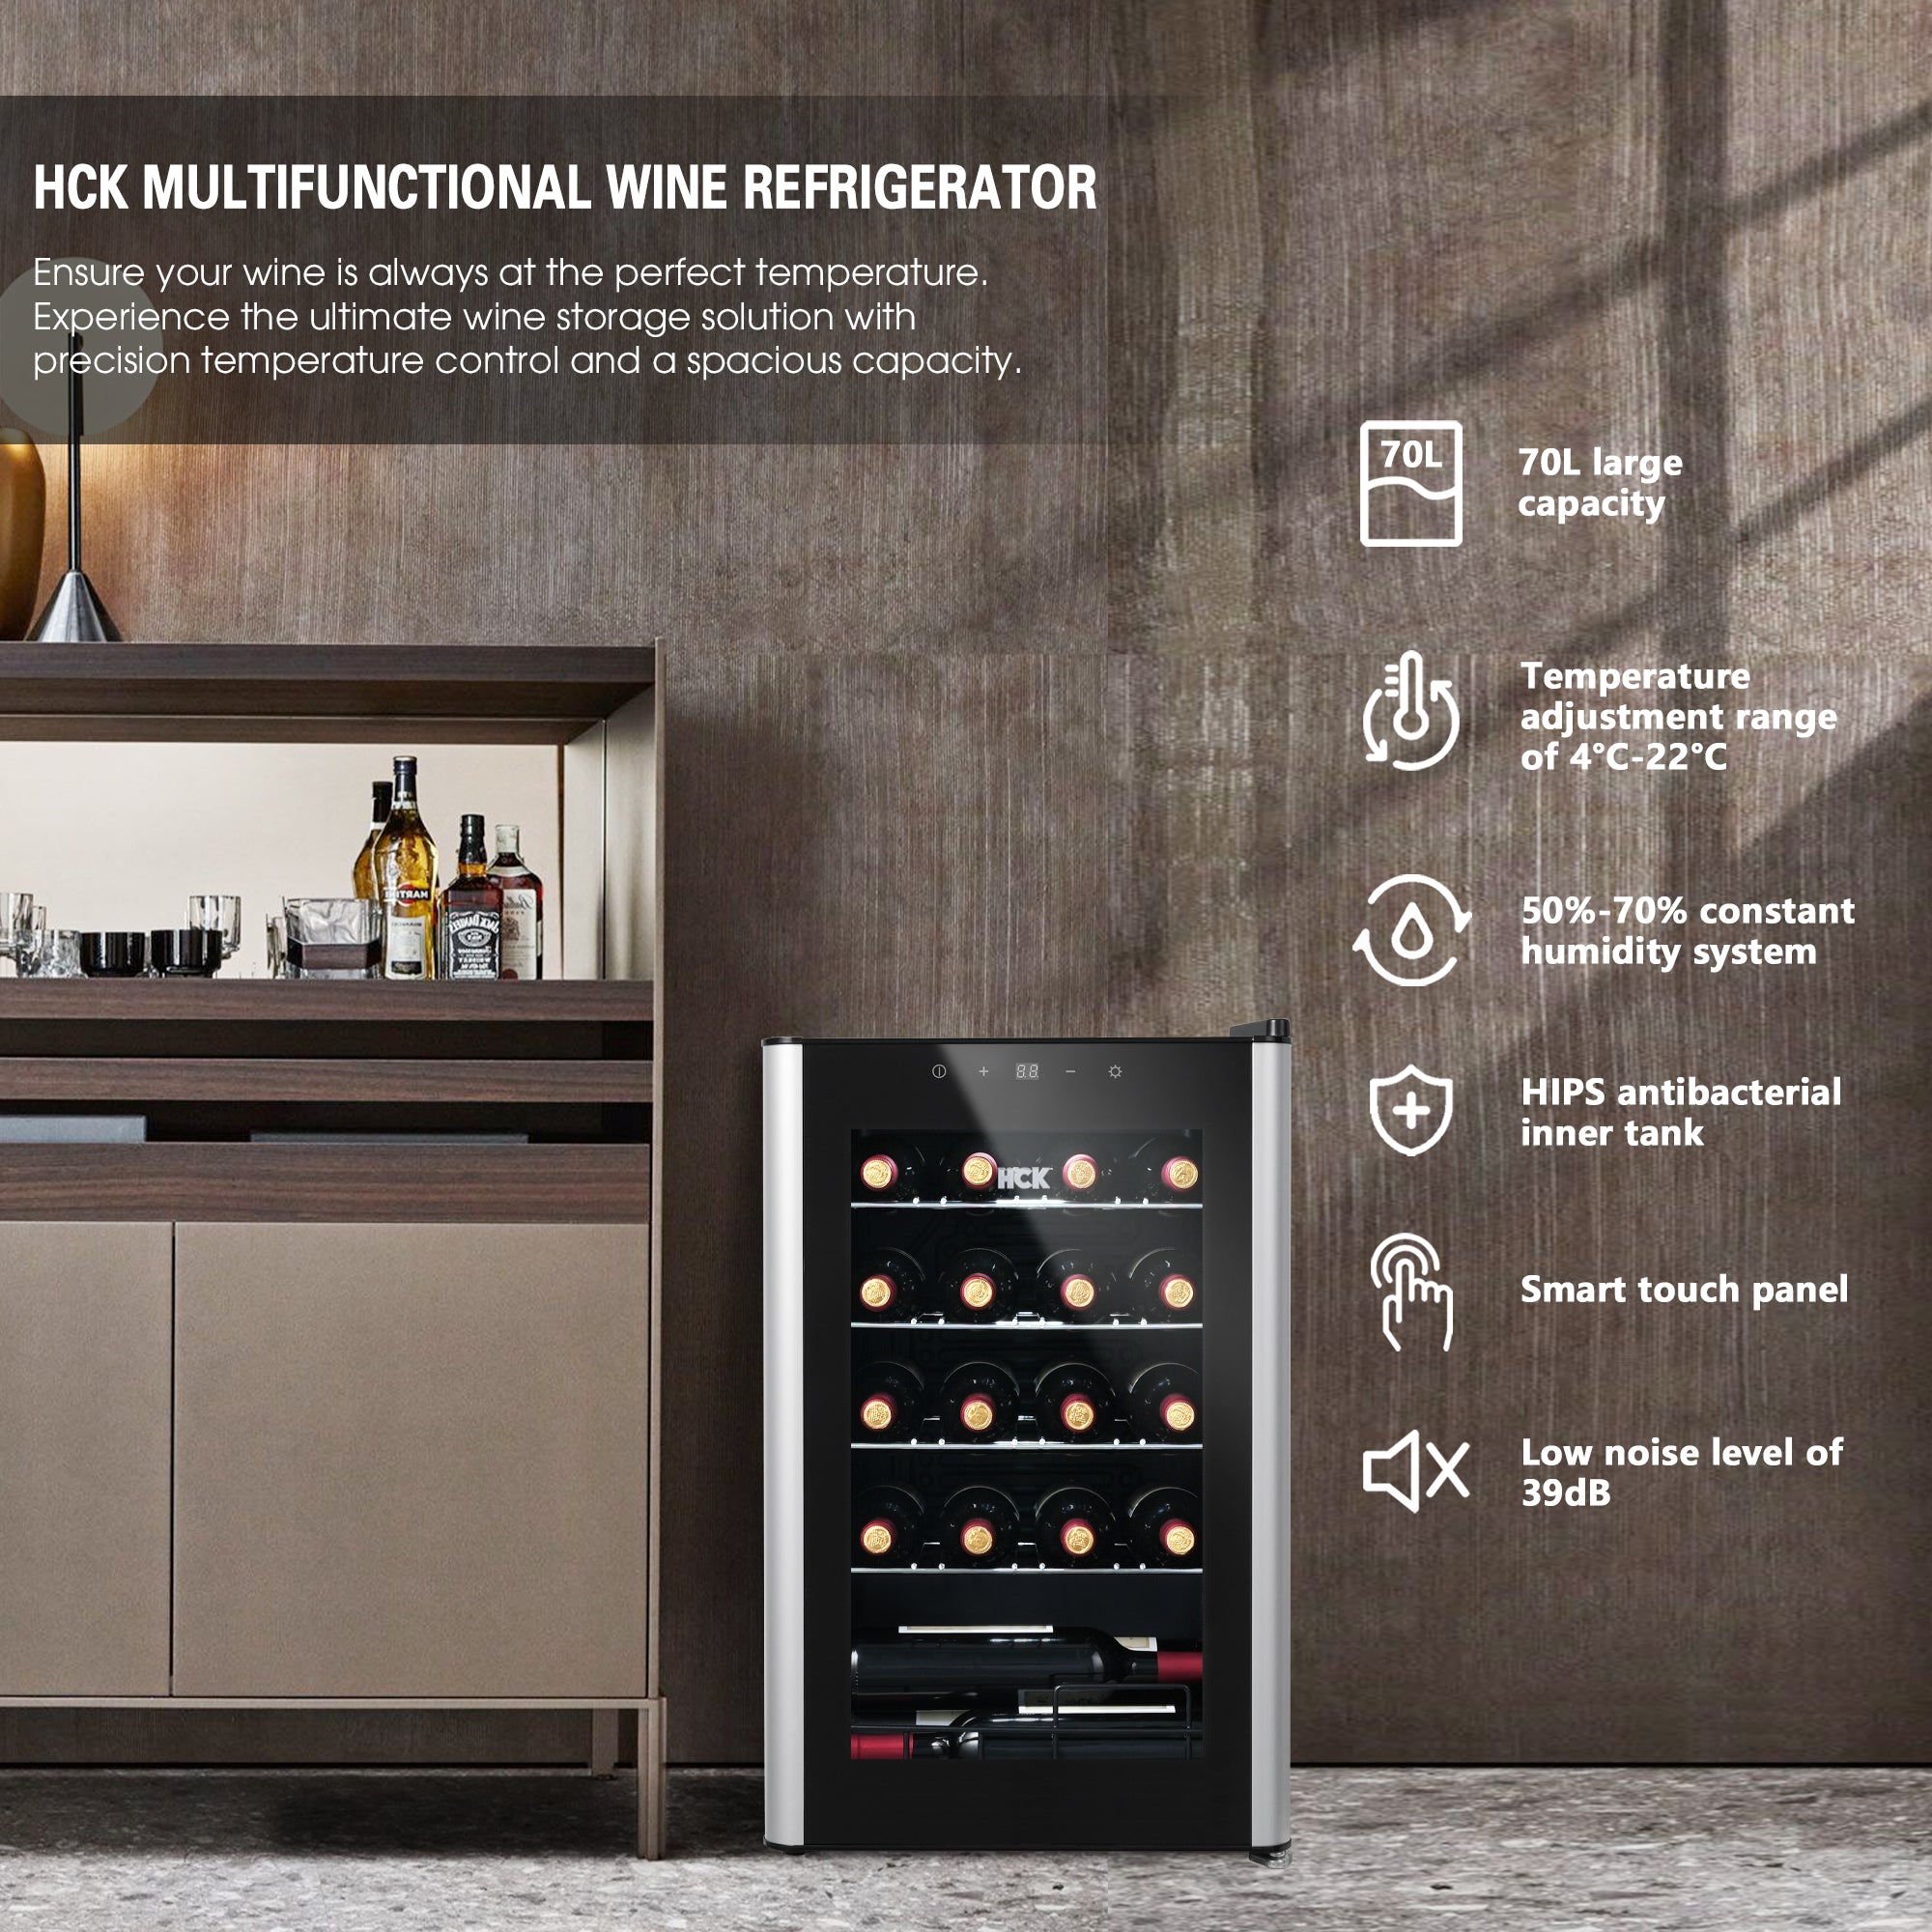 Front view of the wine storage setup featuring the 70L Freestanding Dual Zone Wine Fridge 24 Bottles, complemented by icons and descriptions highlighting its features